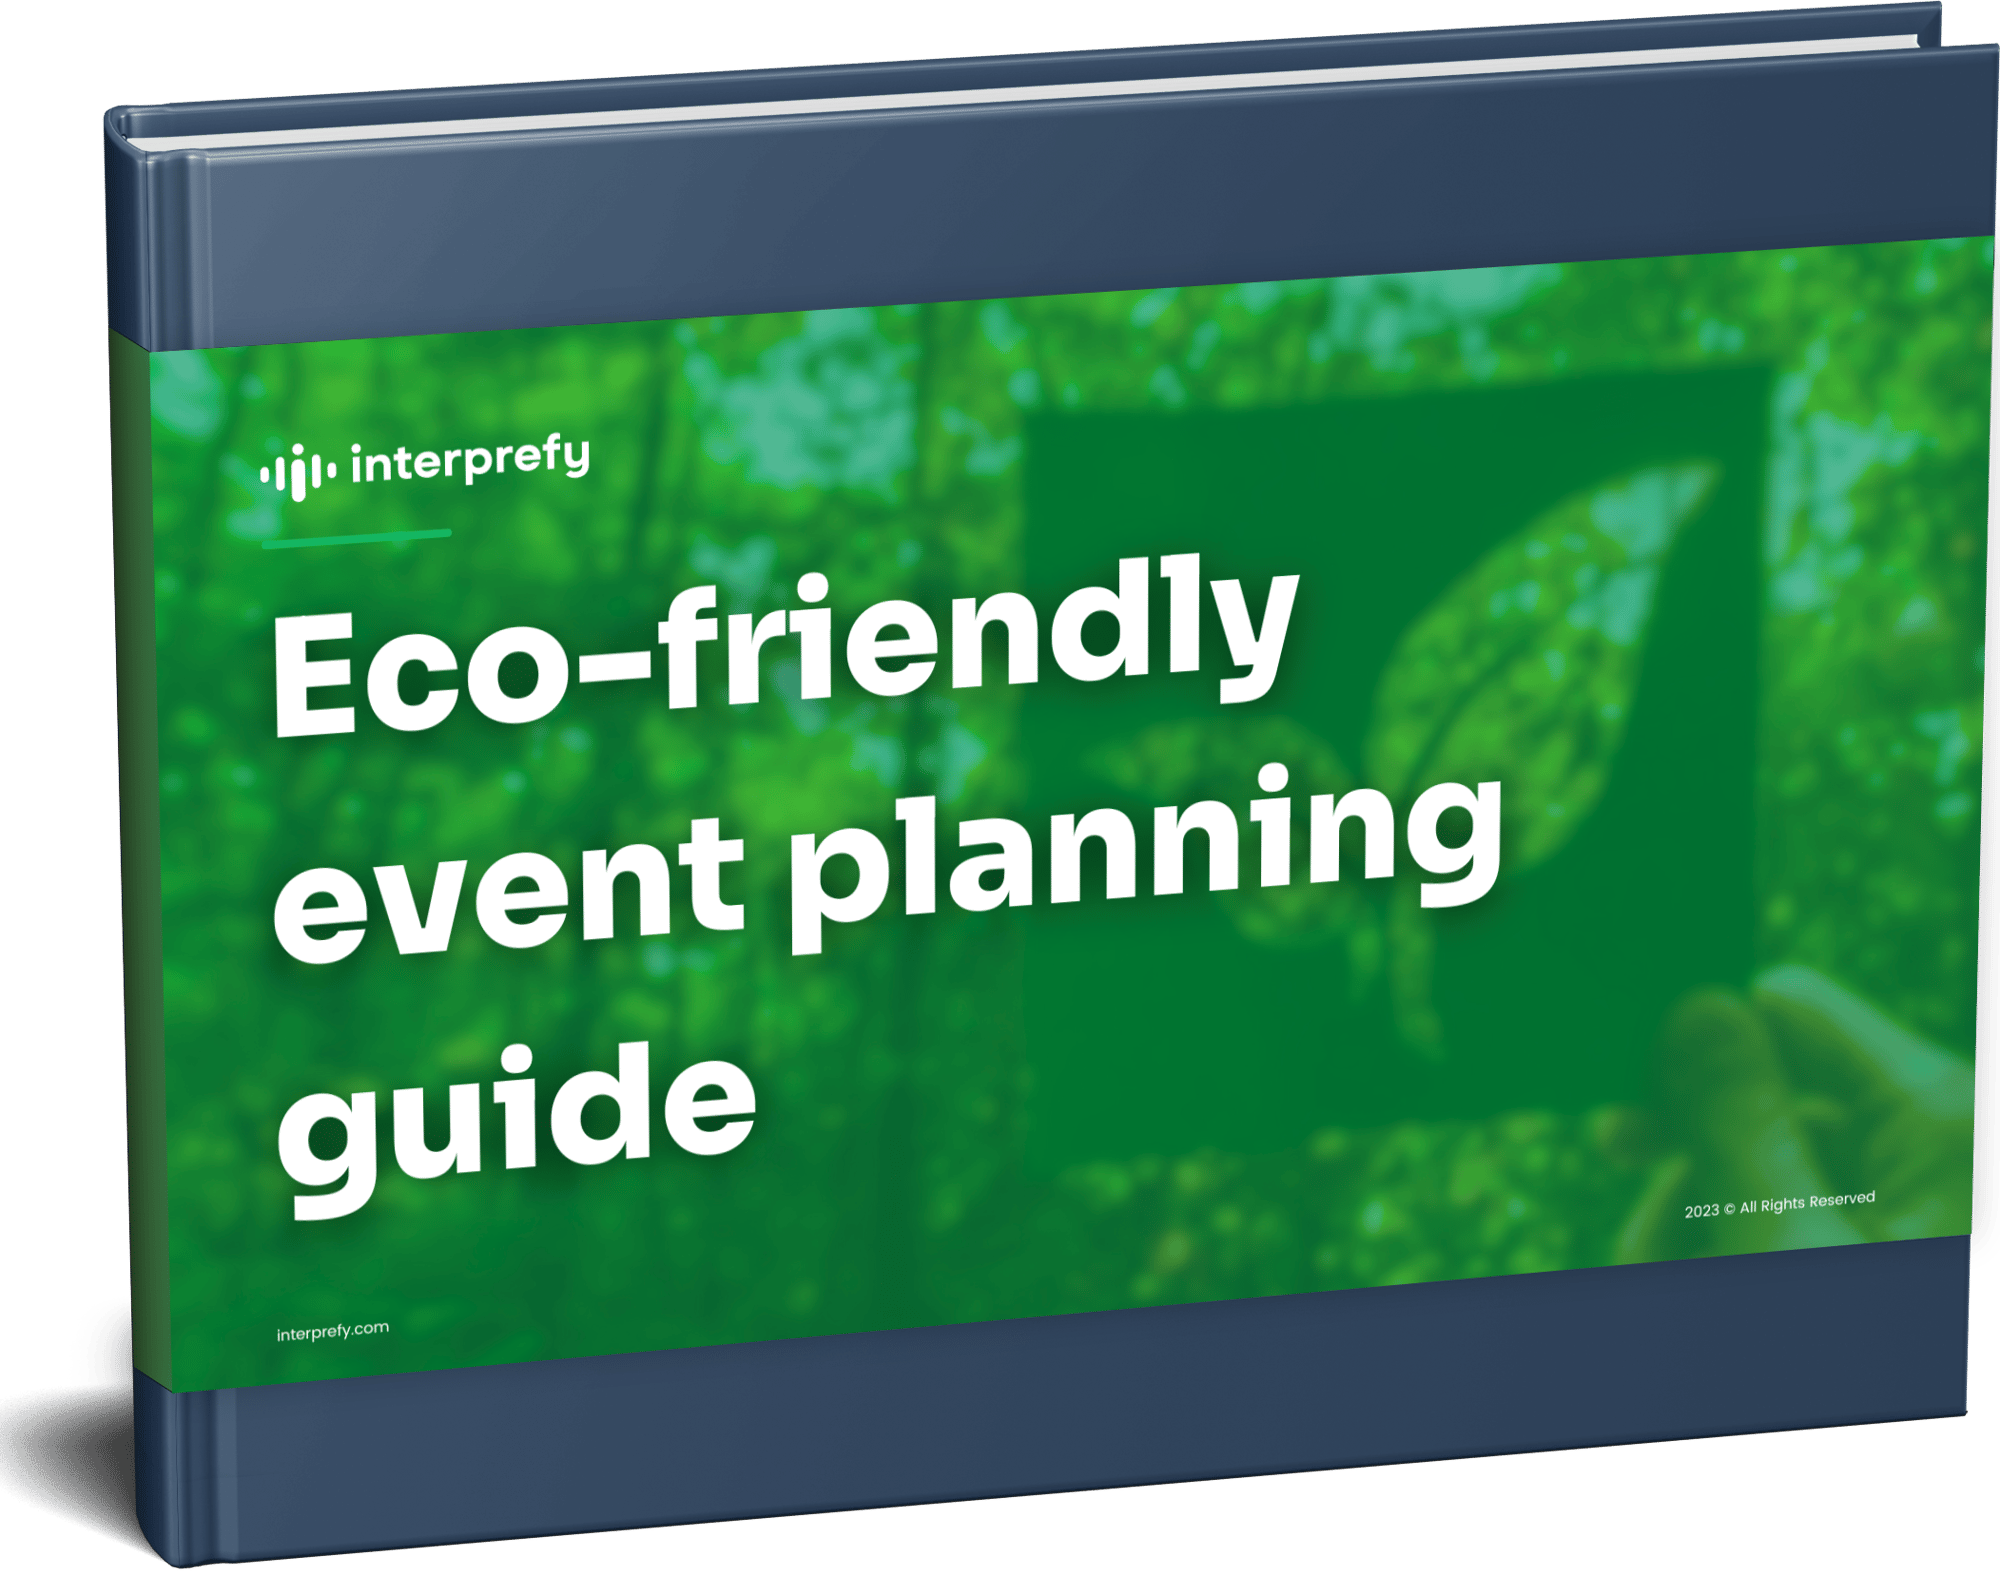 Interprefy eco-freindly event planning guide